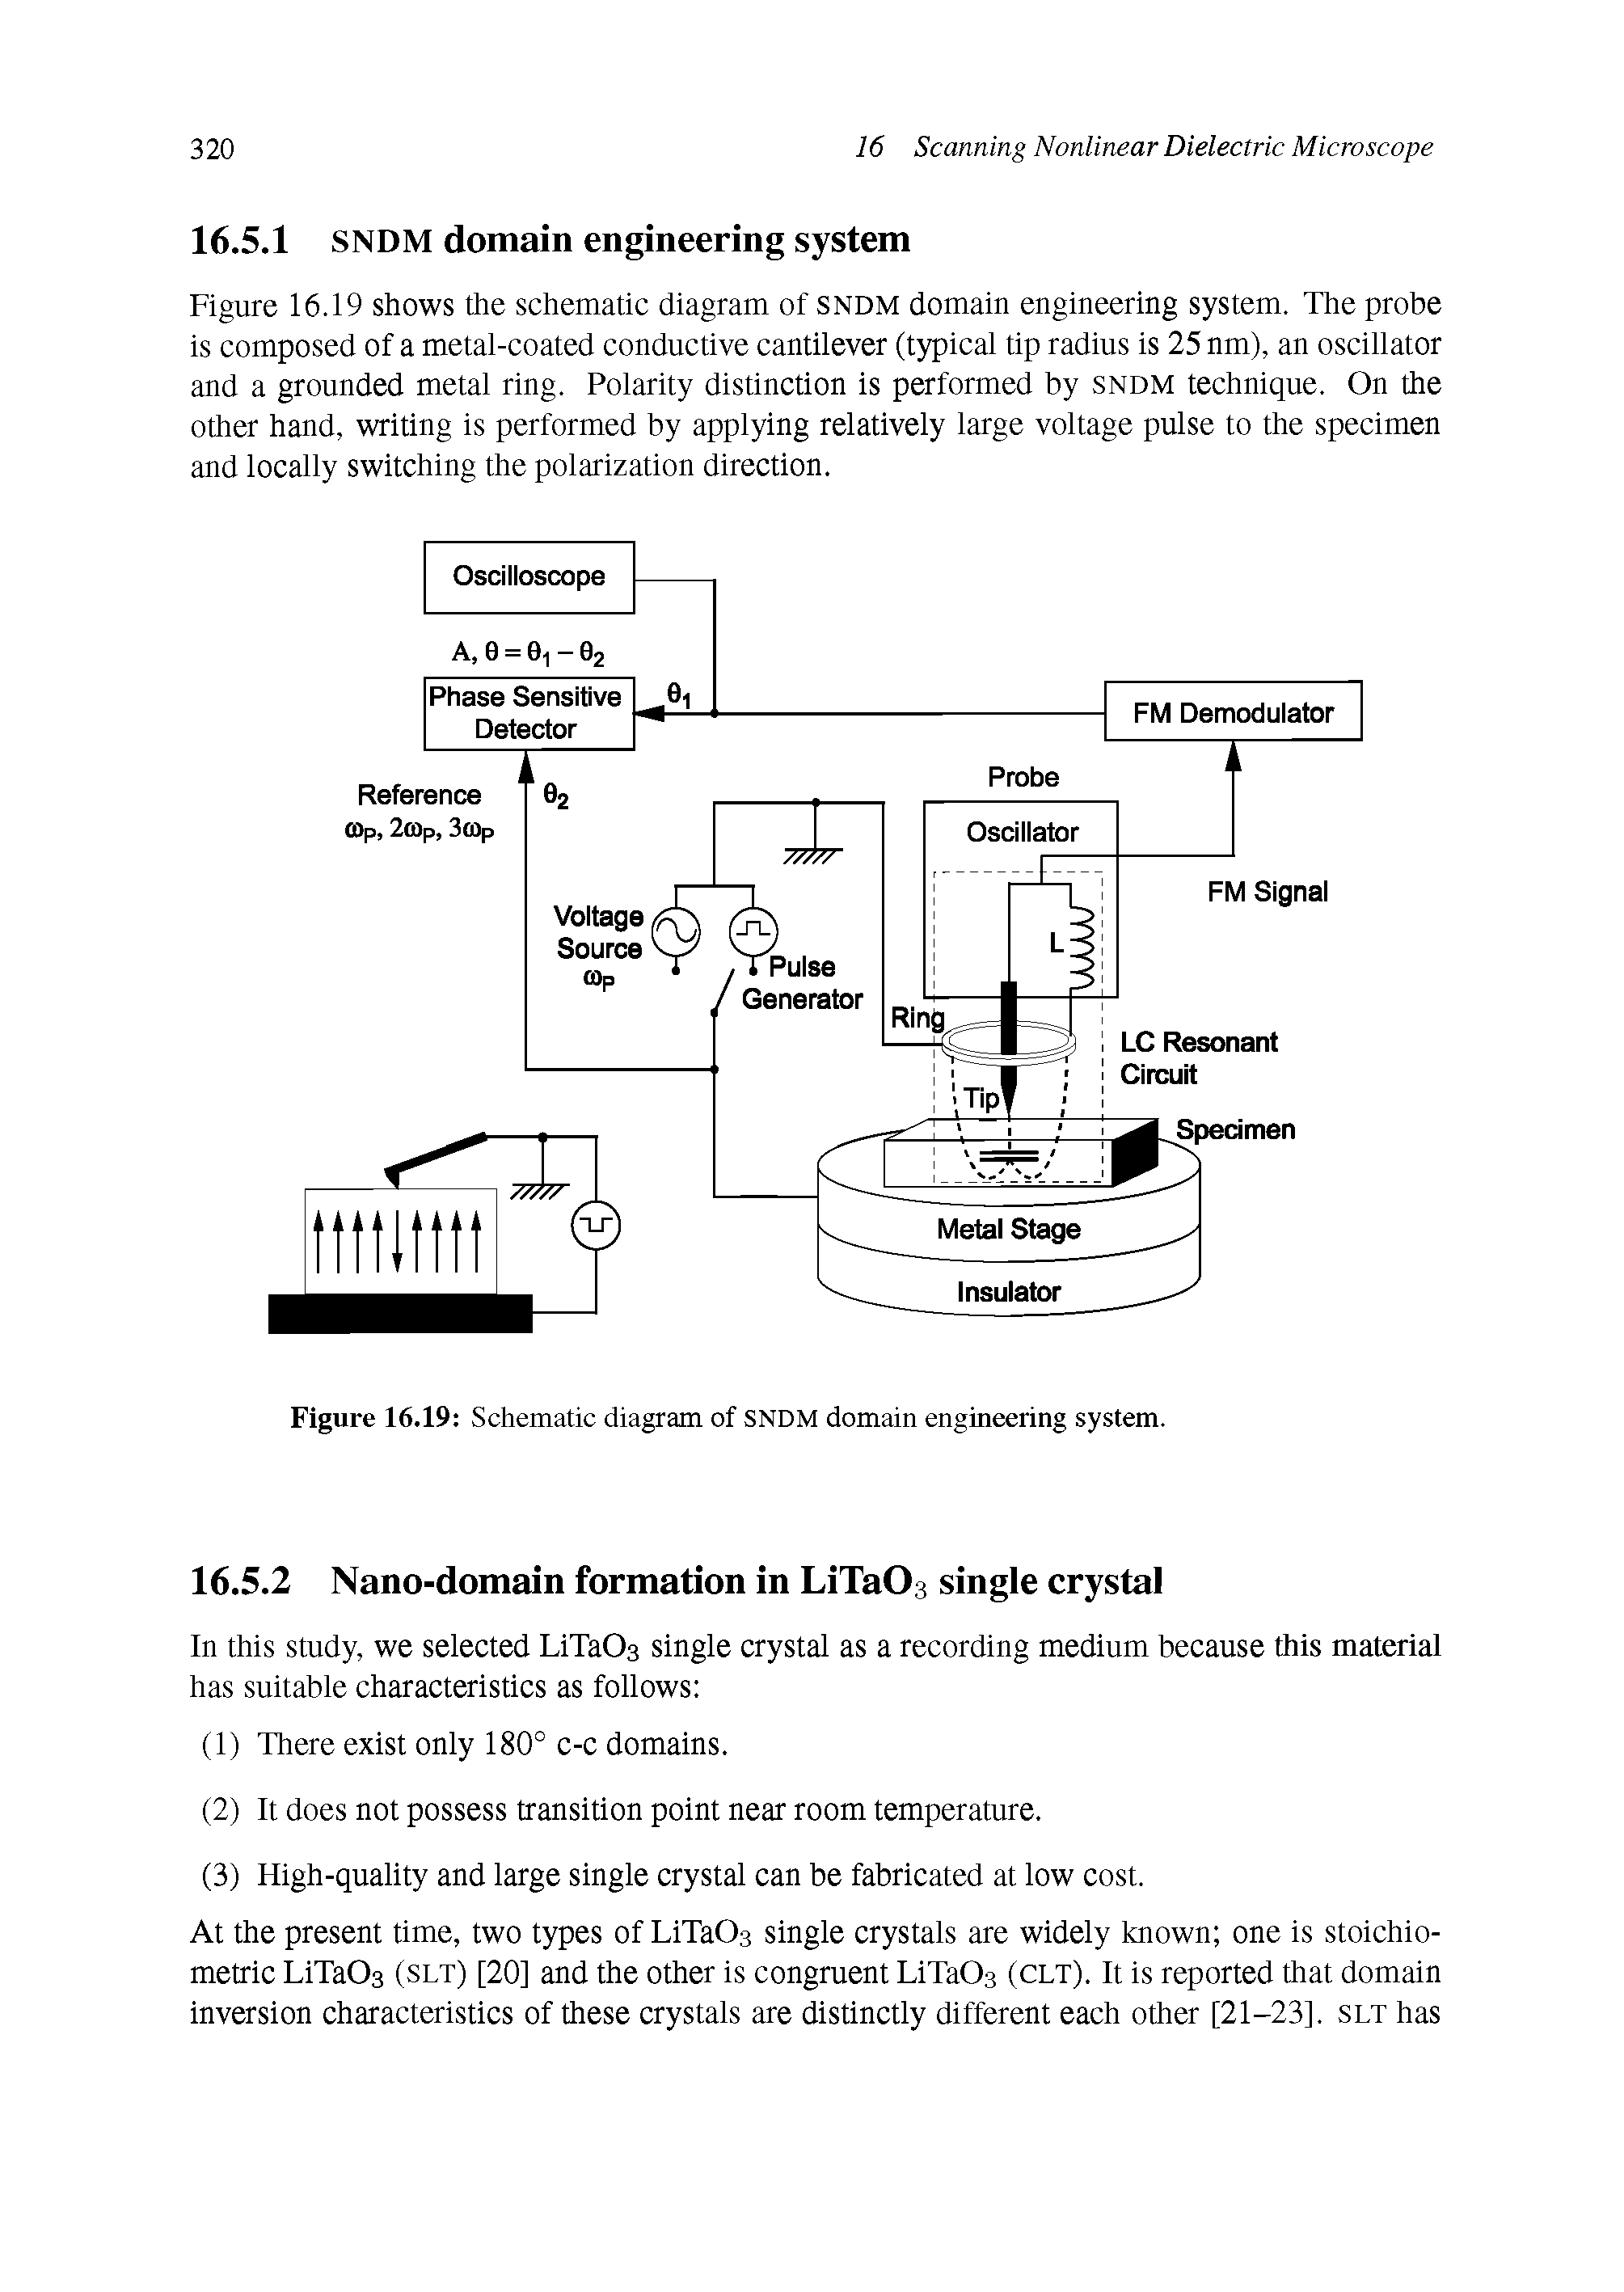 Figure 16.19 Schematic diagram of SNDM domain engineering system.